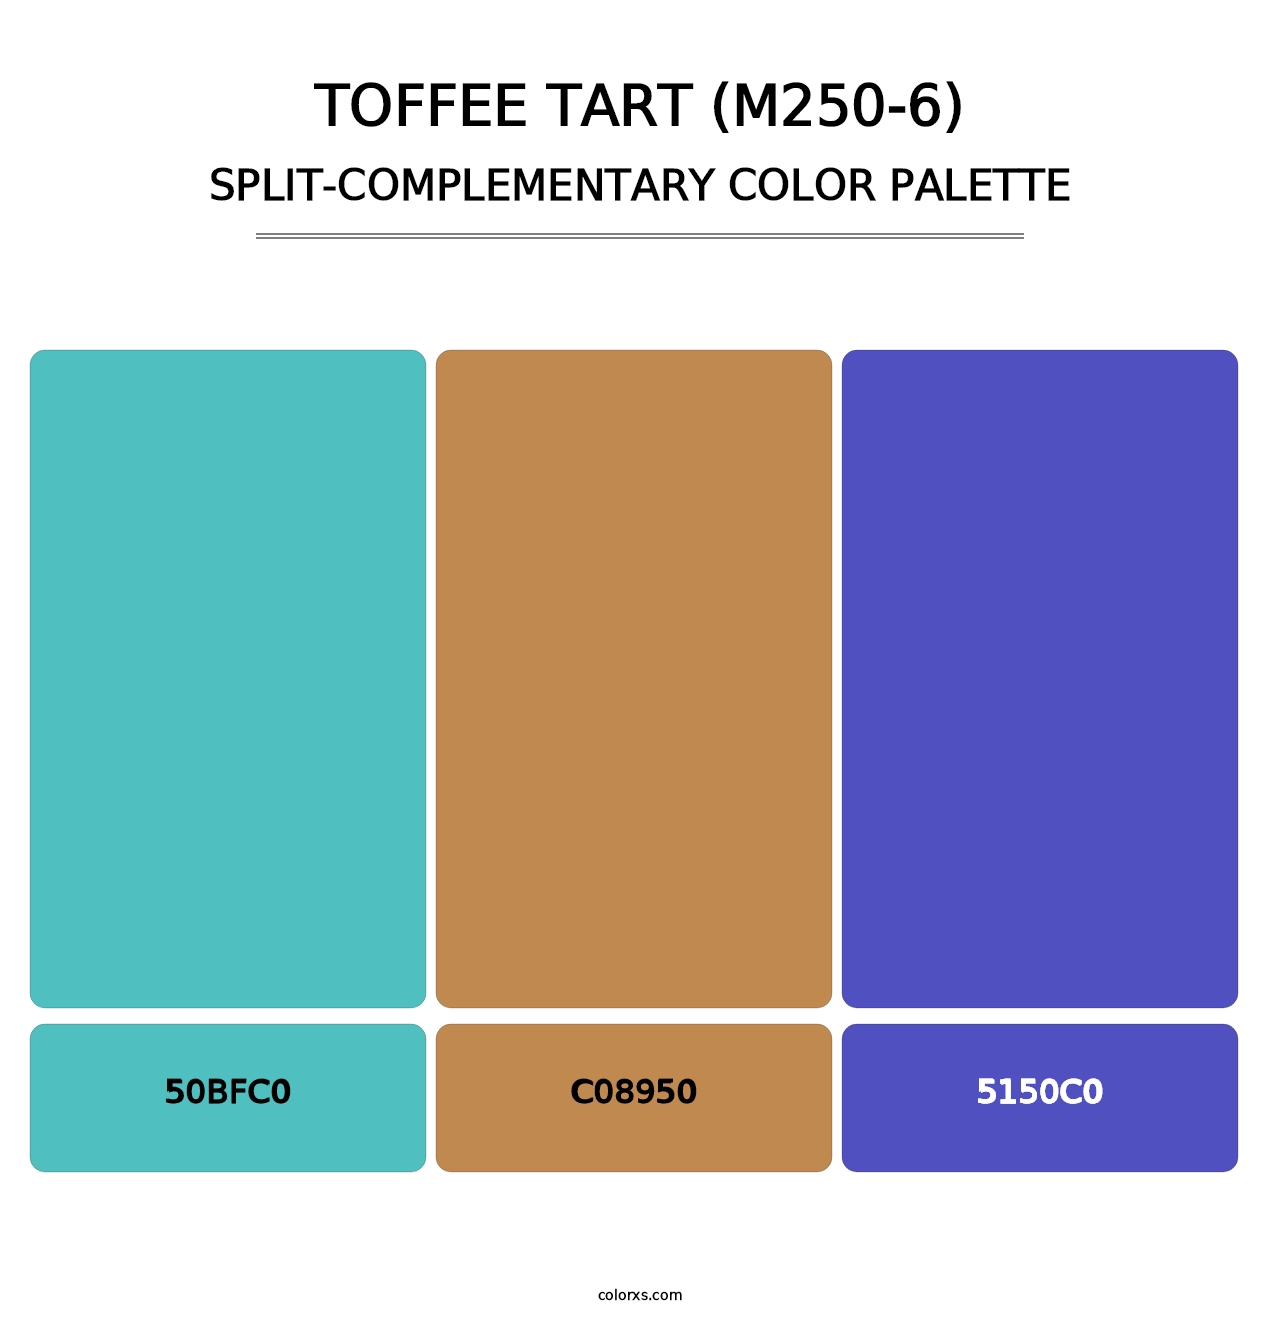 Toffee Tart (M250-6) - Split-Complementary Color Palette